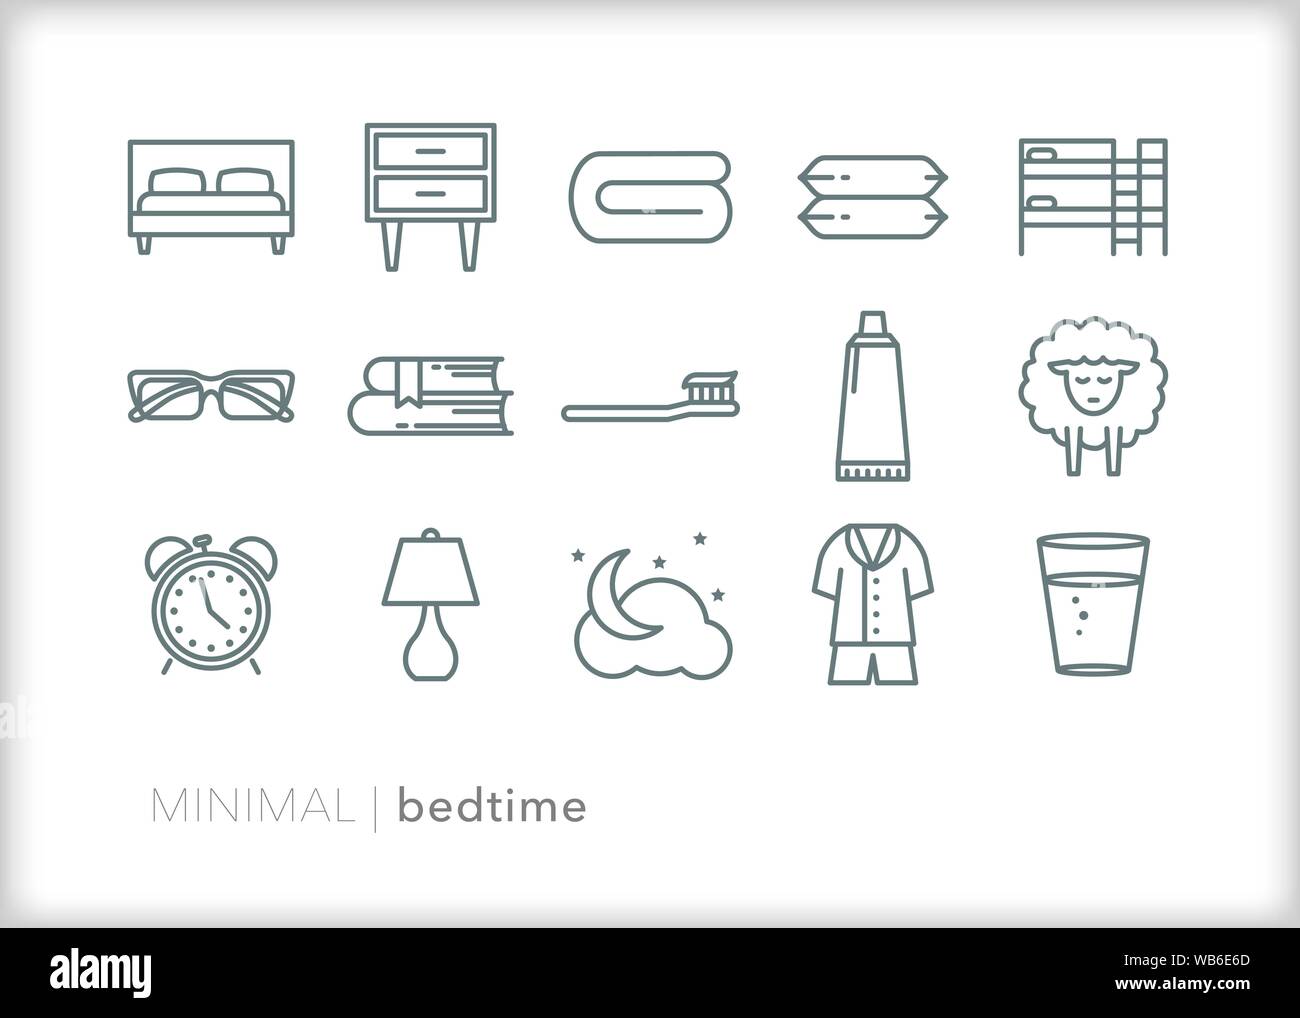 Set of 15 bedtime line icons for the routines people go through before going to bed for the night Stock Vector